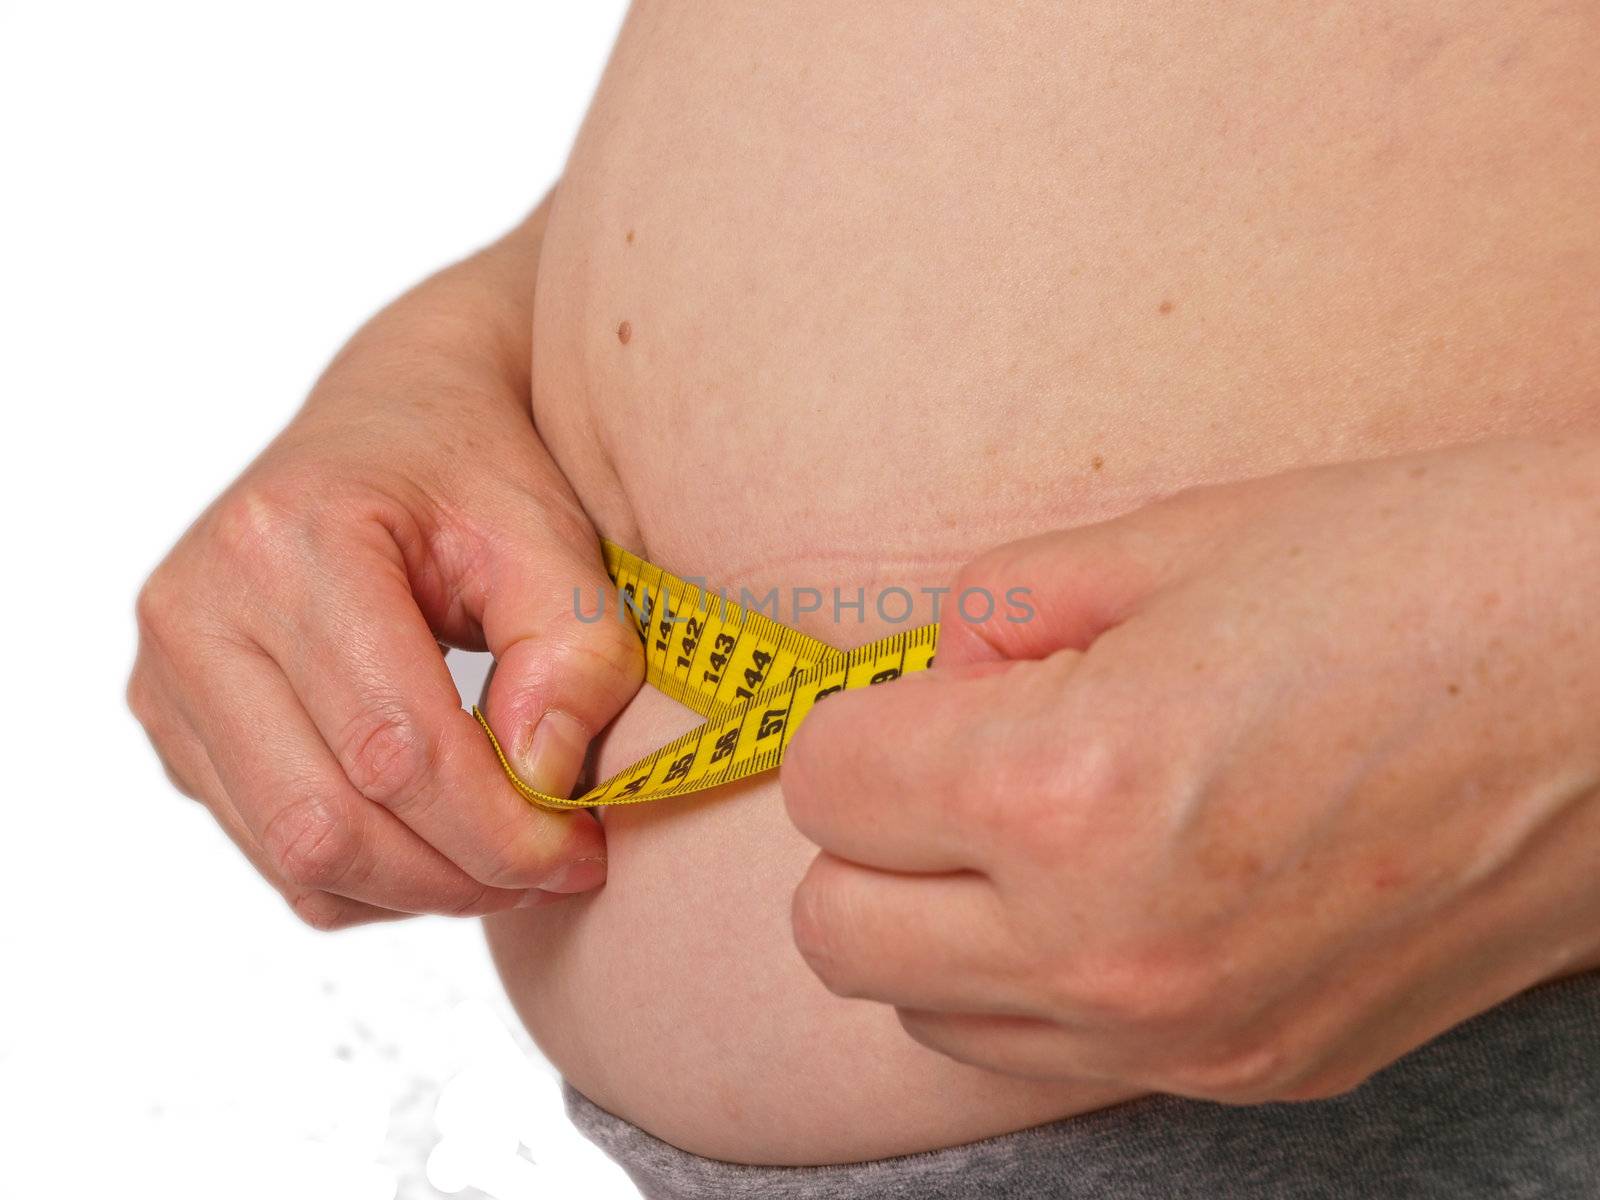 Overweight female. Waist circumference measured. White background by dotweb